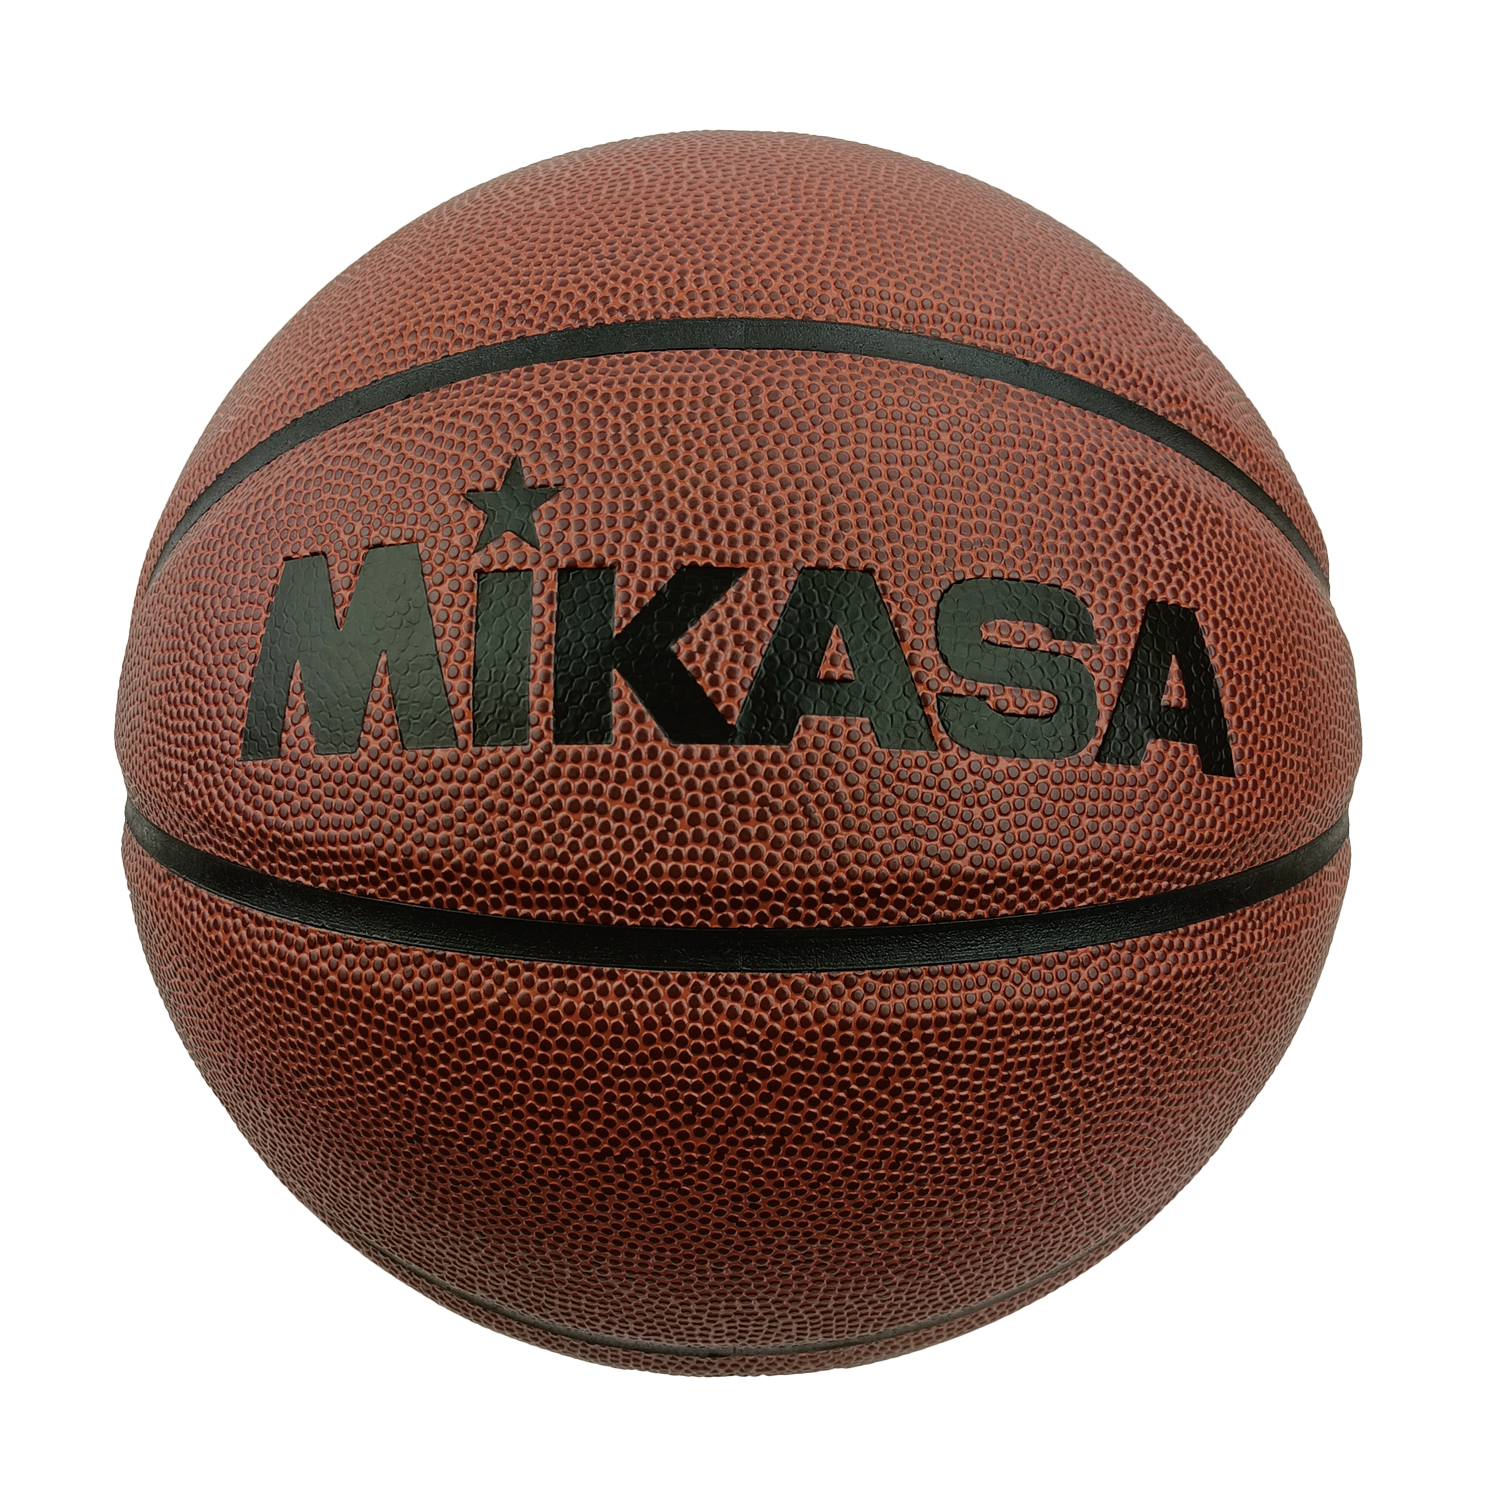 MIKASA CF700 BASKETBALL HIGH GRADE SYNTHETIC LEATHER SIZE 7, , large image number null